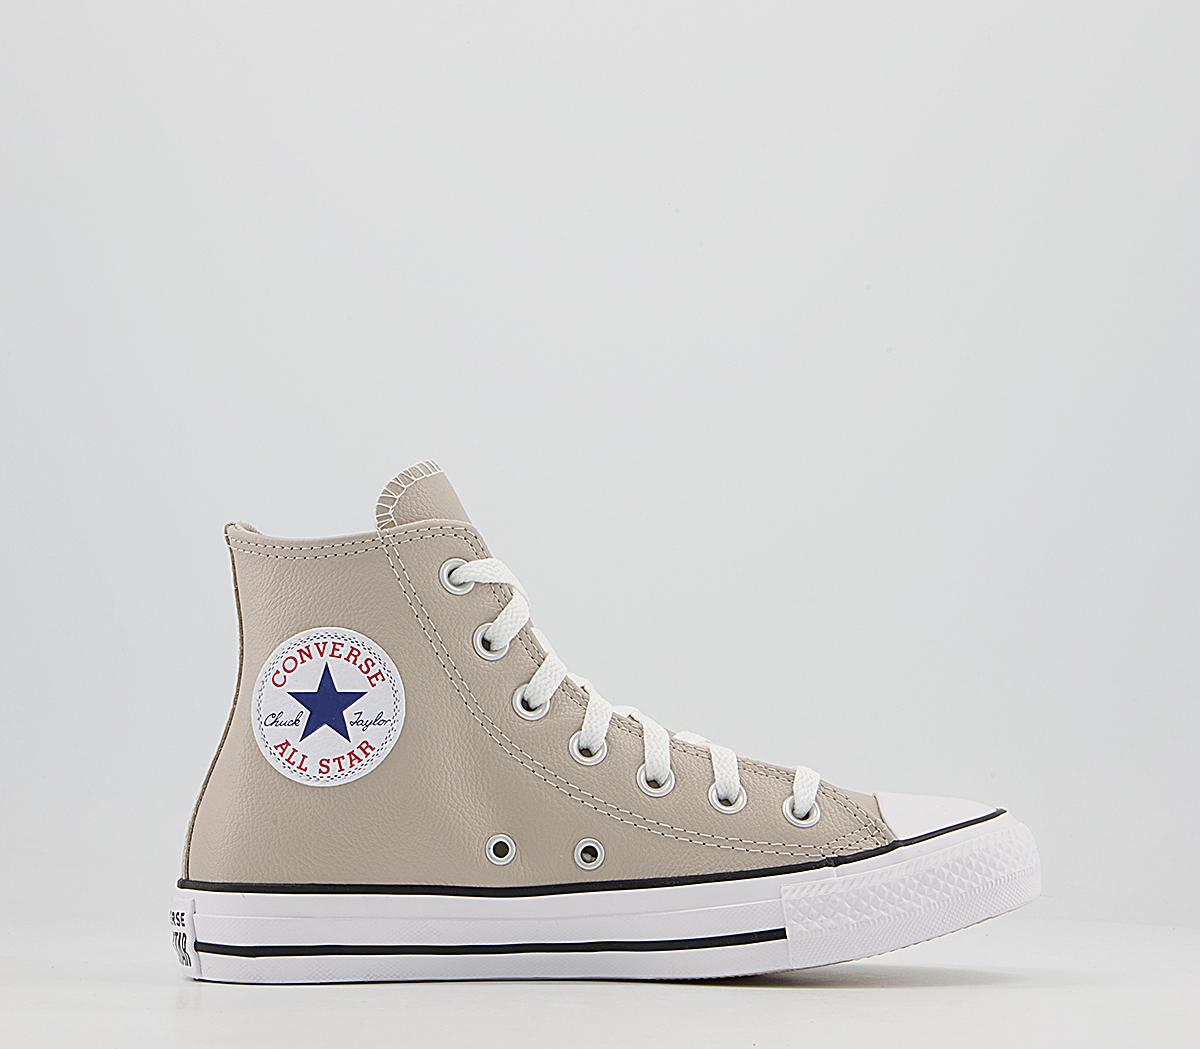 ConverseAll Star Hi Leather TrainersString